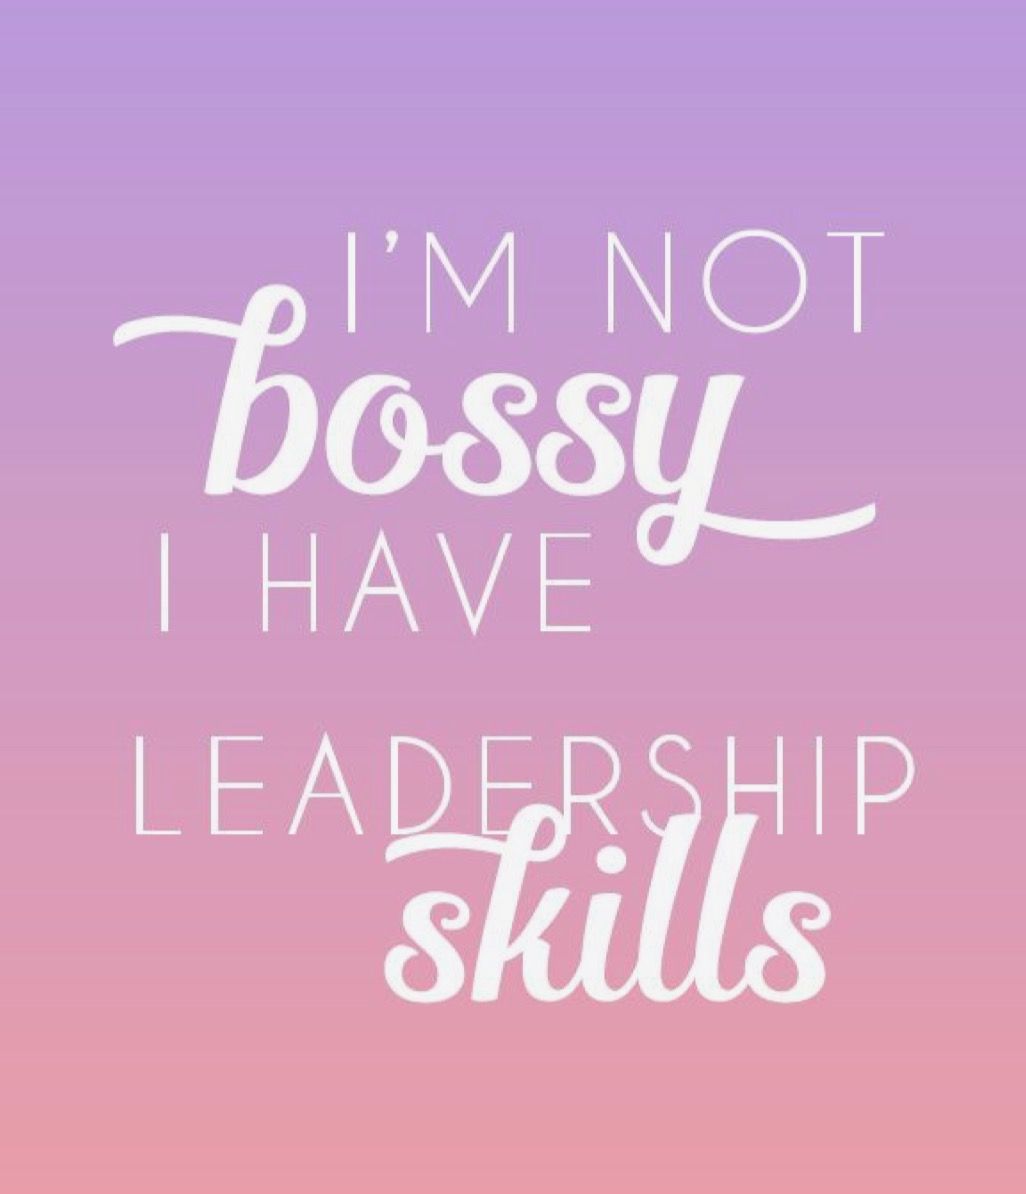 My way of being isn't bossy.. Funny quotes wallpaper, Quotes wallpaper for mobile, Funky wallpaper